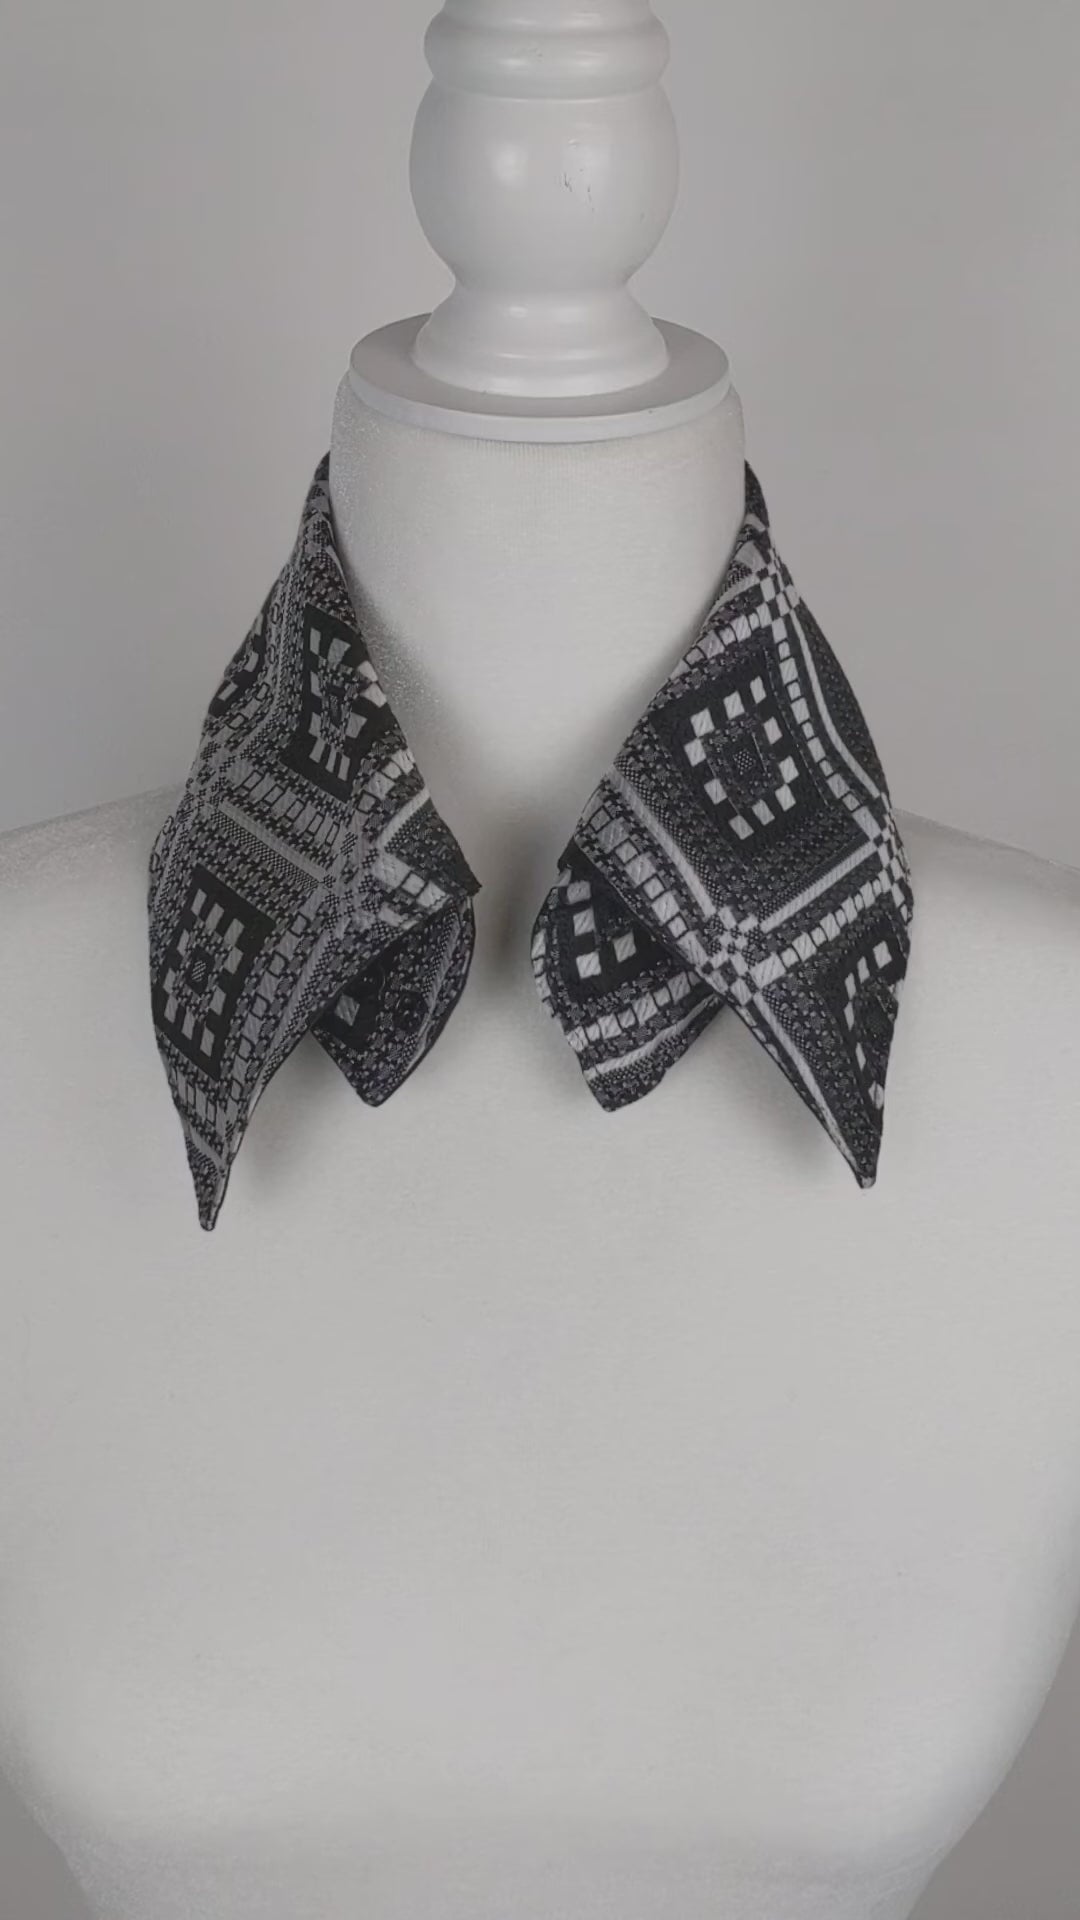 Detachable Collar In Black And White 1970's Print.